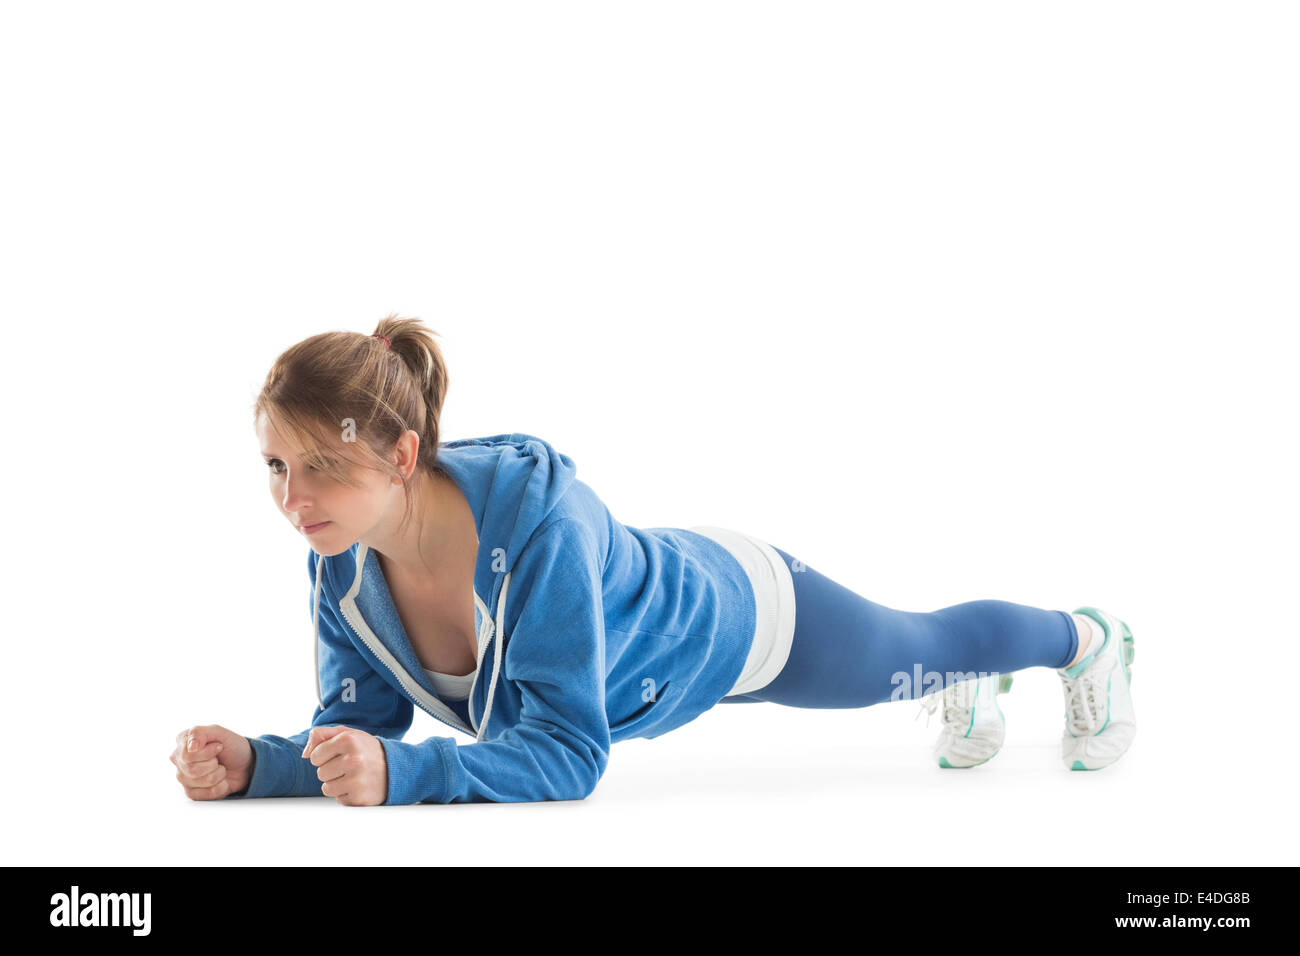 Young woman in basic plank posture Stock Photo